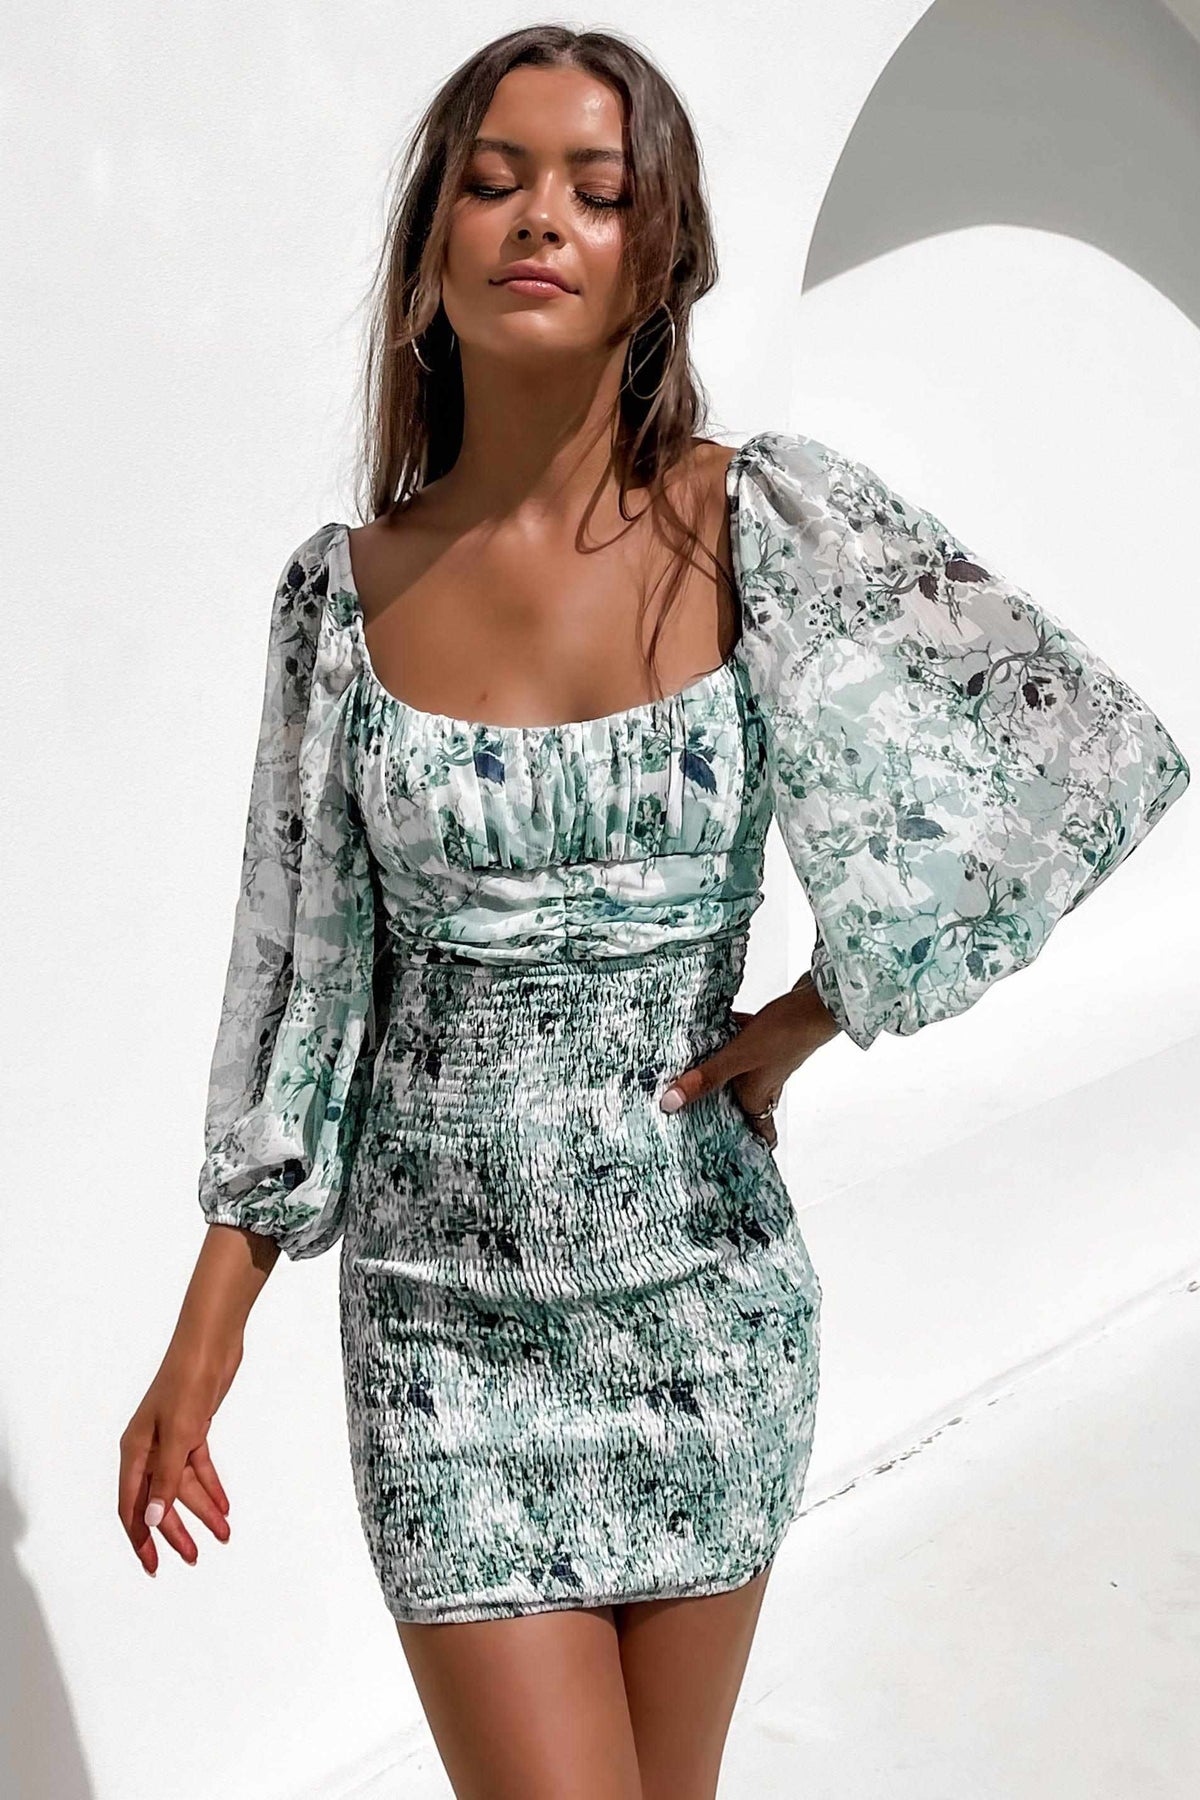 Auricle Dress, BALLOON SLEEVE, BLUE, DRESS, DRESSES, ELASTIC, GATHERED, LONG SLEEVE, NEW ARRIVALS, OFF SHOULDER, PATTERN, POLYESTER, Sale, Auricle Dress only $79.00 @ MISHKAH ONLINE FASHION BOUTIQUE, Shop The Latest Women&#39;s Dresses - Our New Auricle Dress is only $79.00, @ MISHKAH ONLINE FASHION BOUTIQUE-MISHKAH